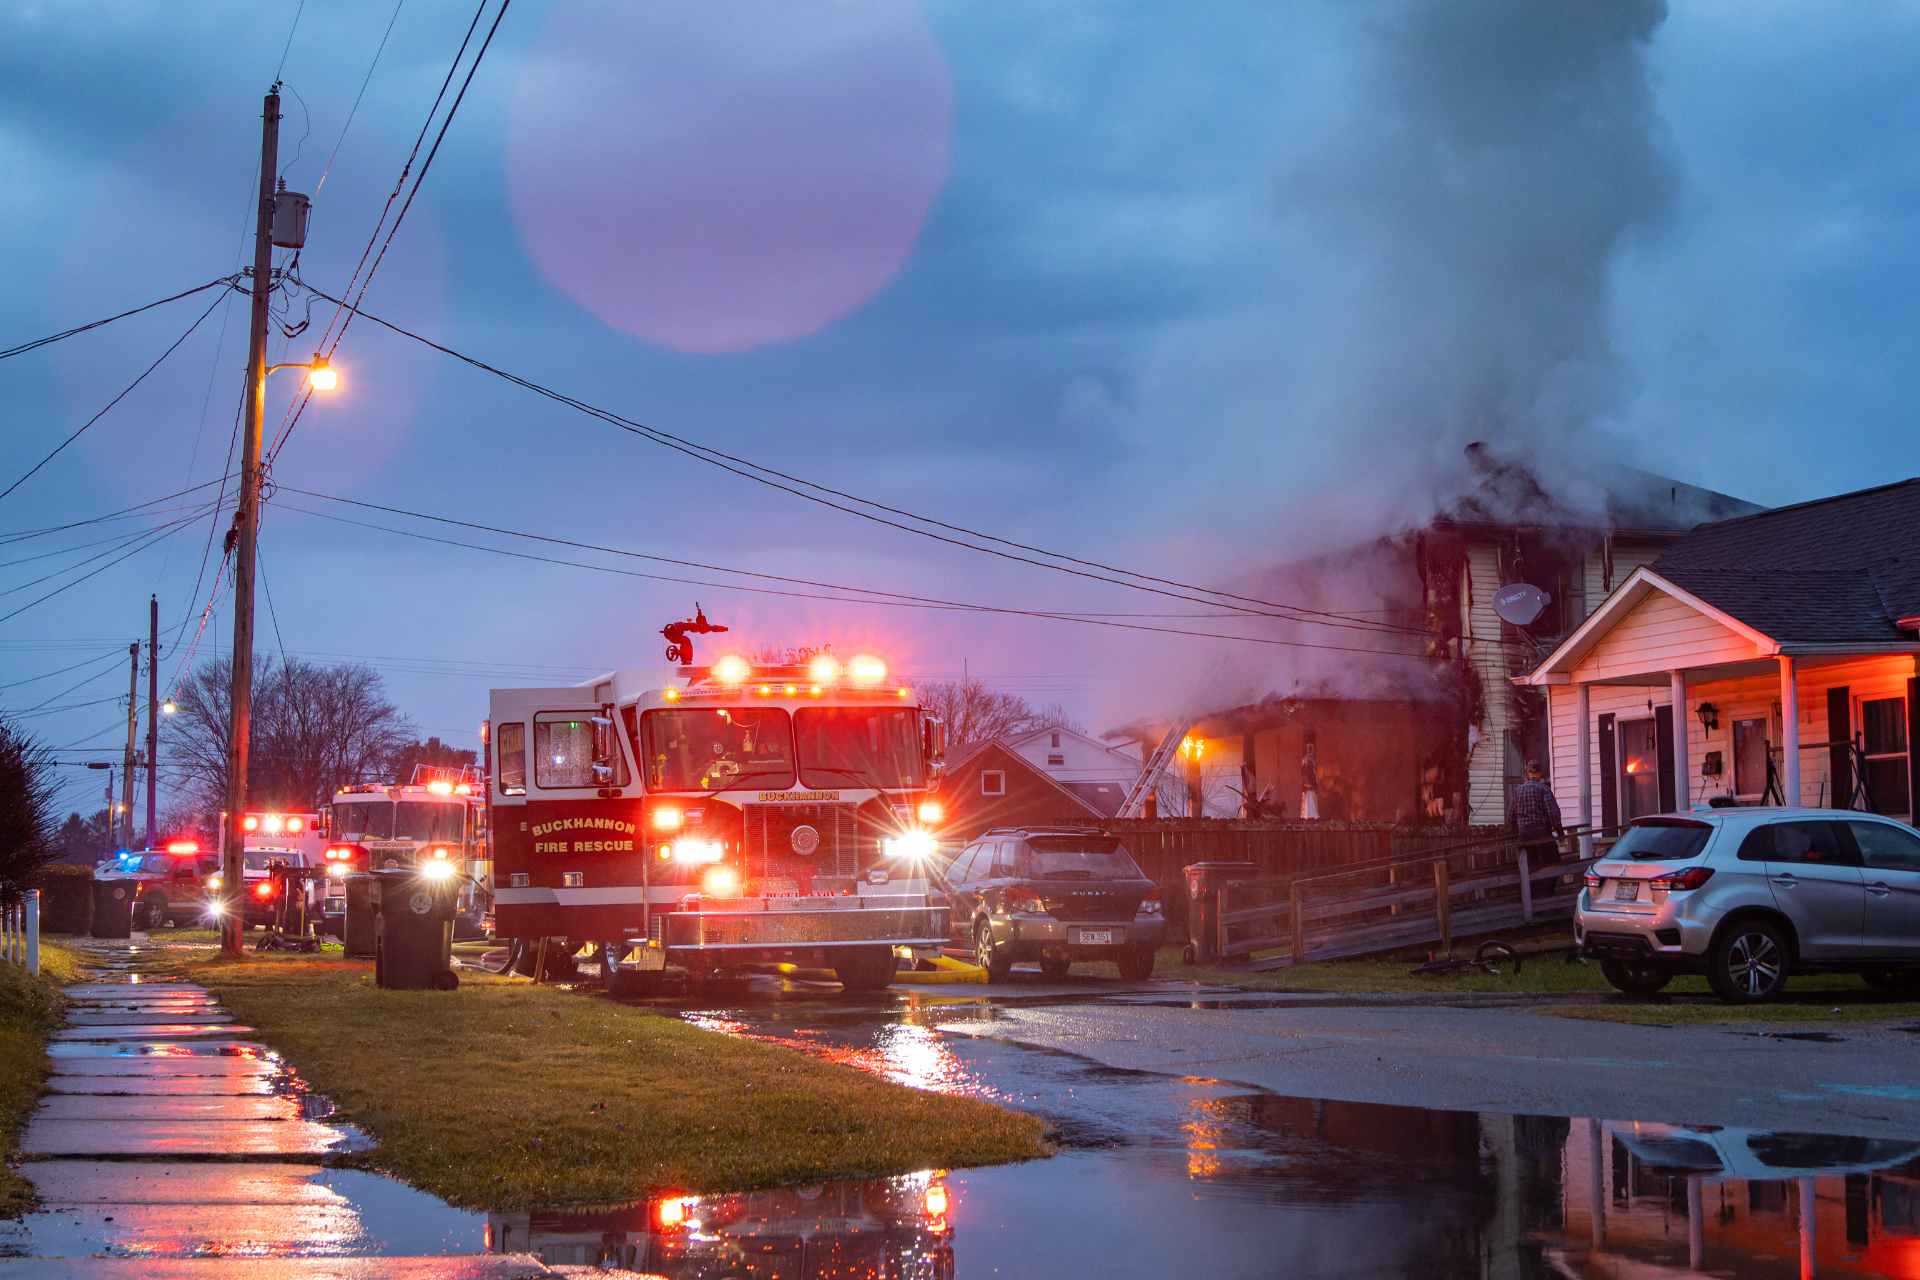 Firefighters work to contain a fire that destroyed a home on Pocahontas Street early Sunday morning. (Photo by Brian Bergstrom/My Buckhannon)